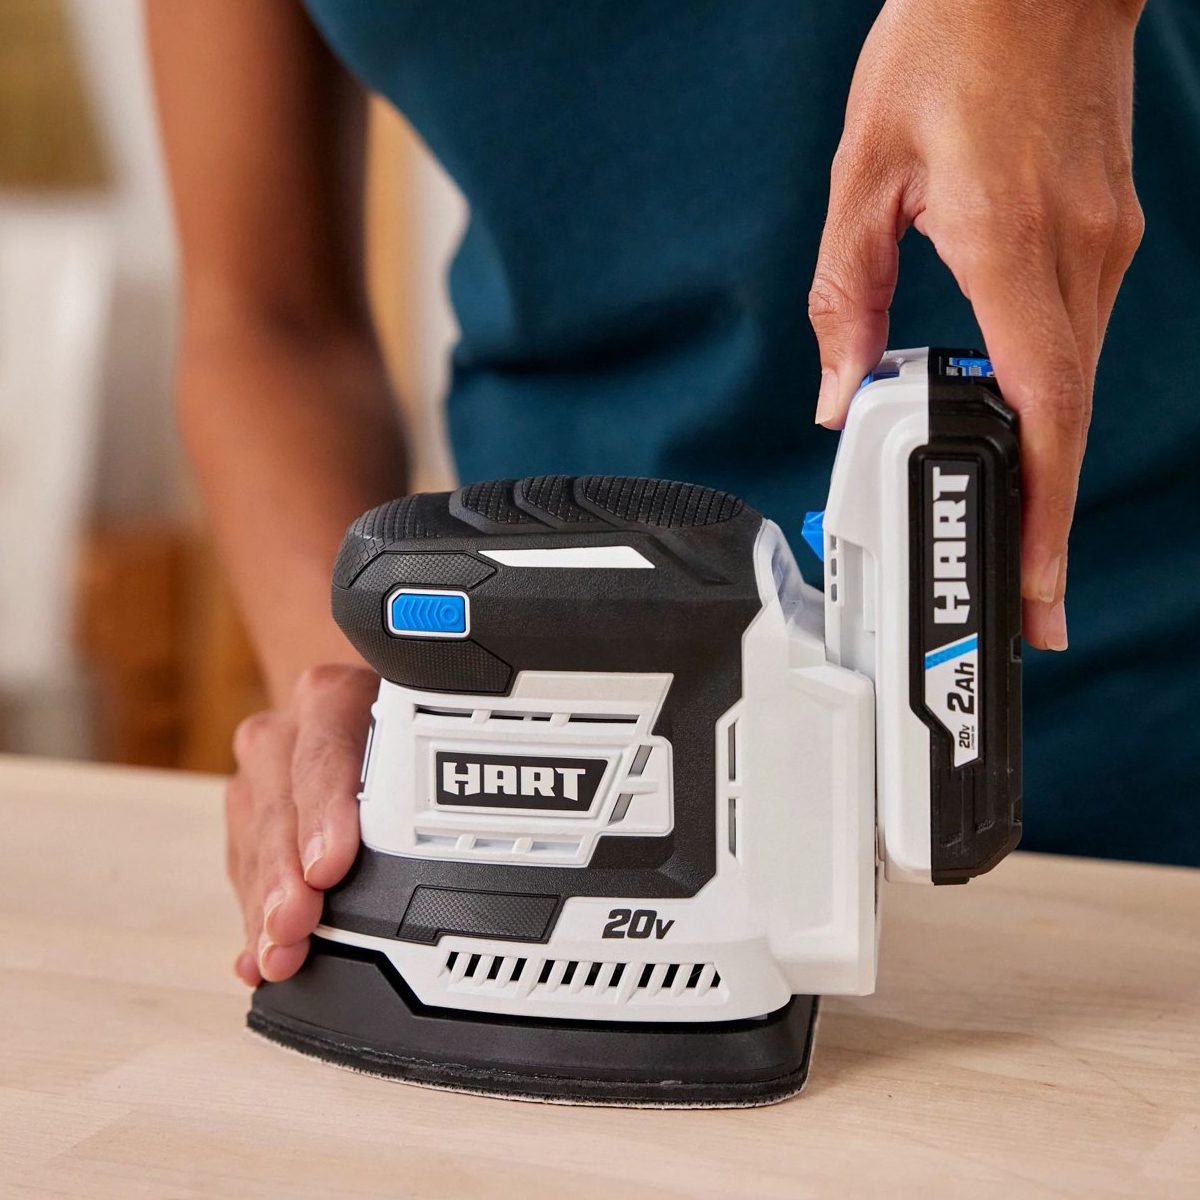 The Best Sanders For Woodworking and Wood Finishing Projects